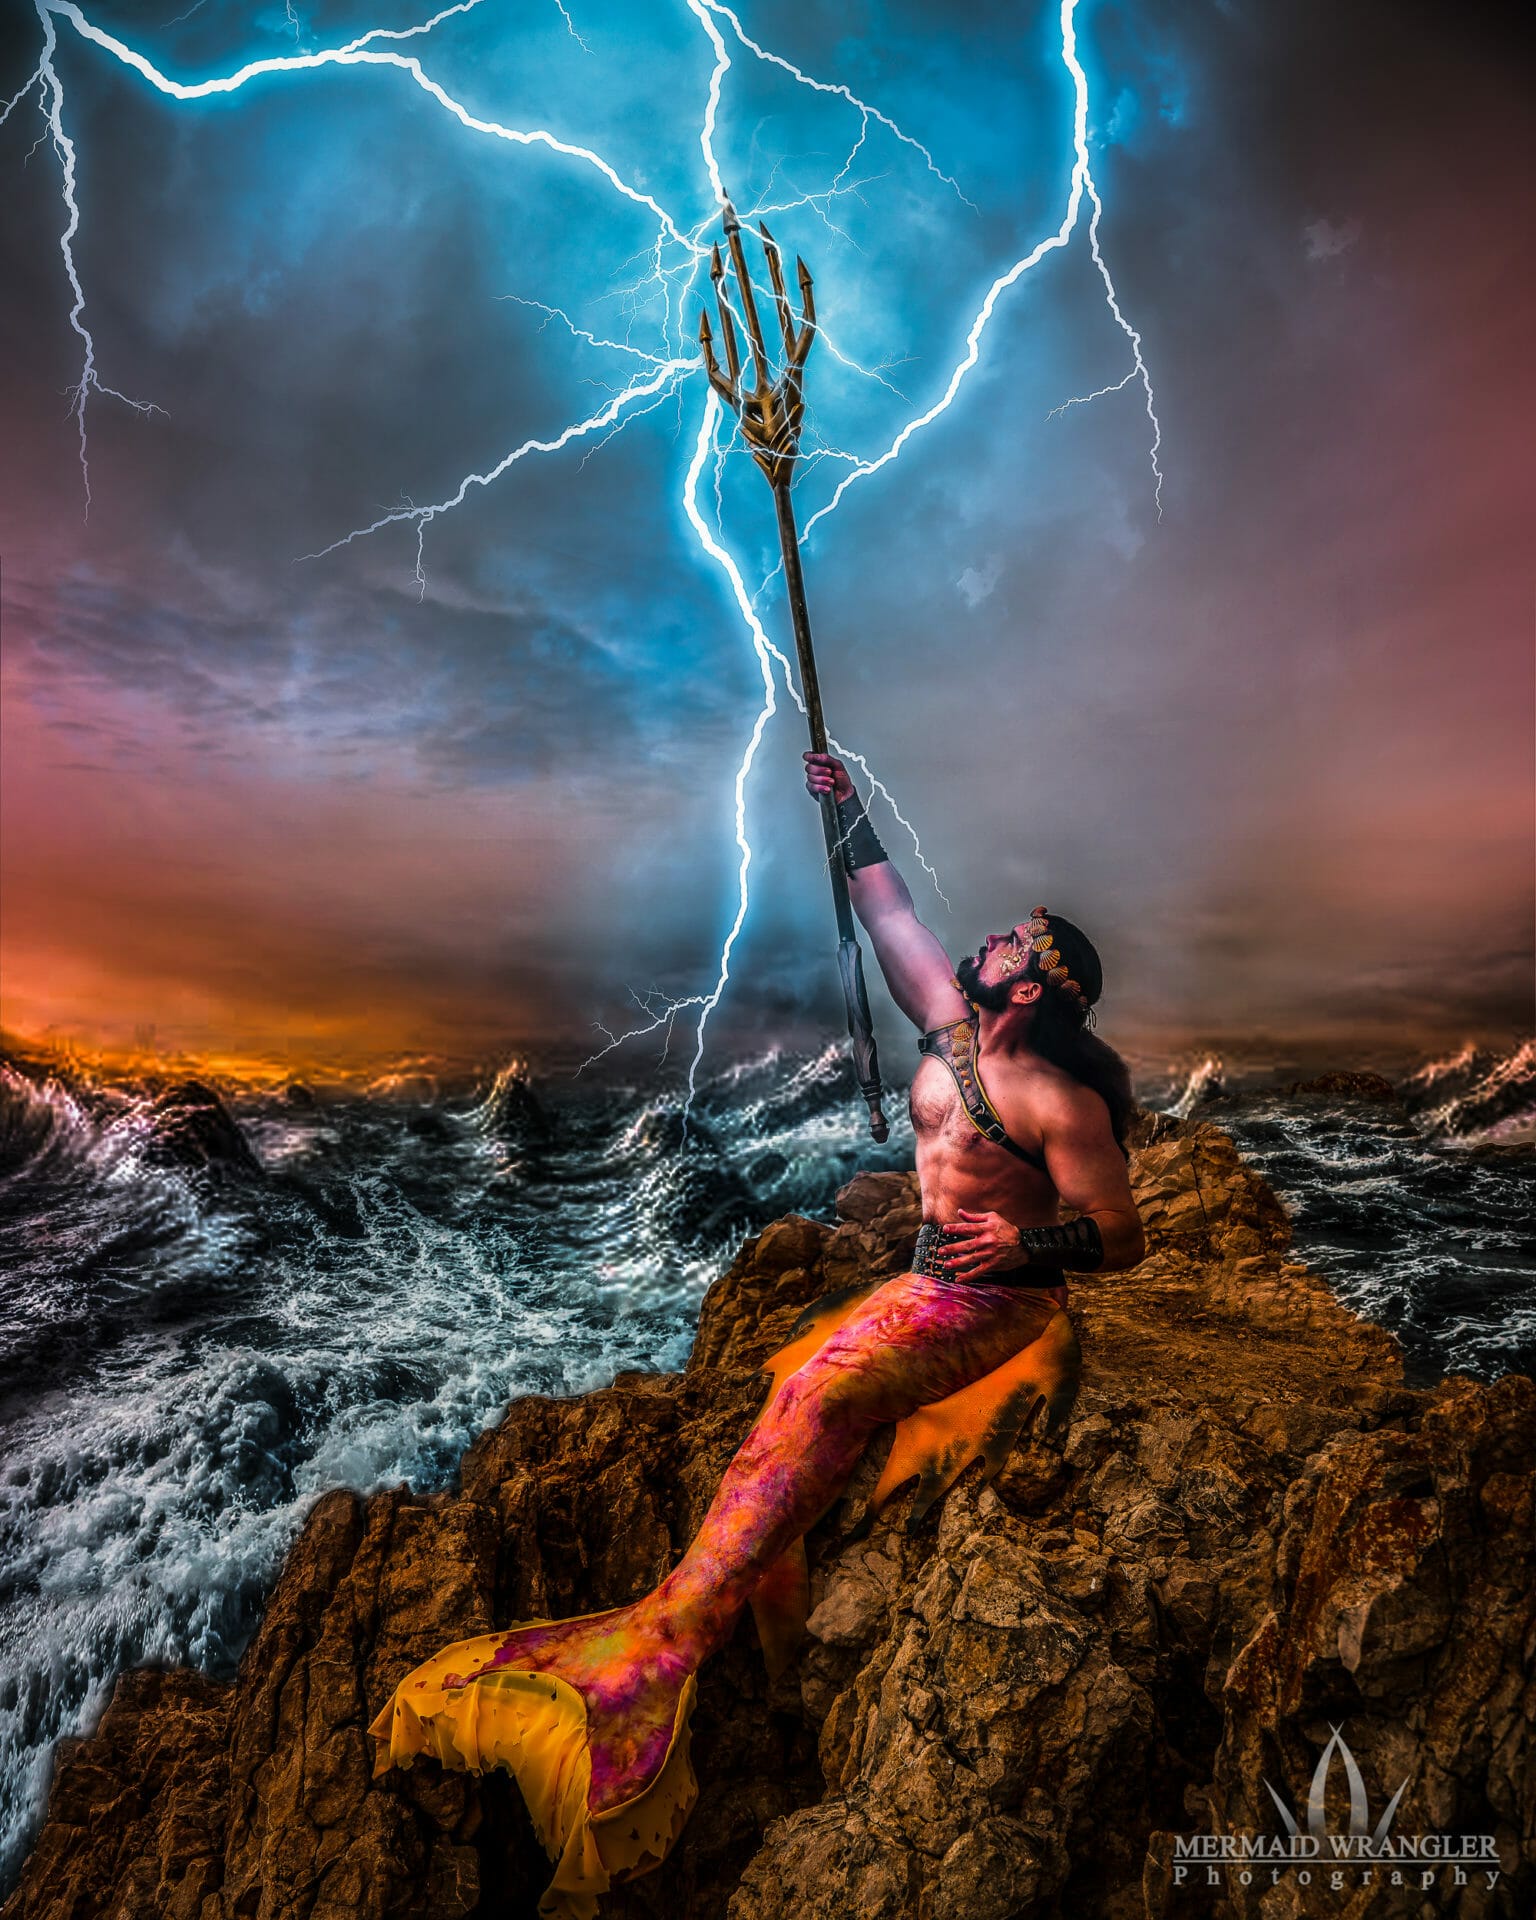 A mermaid filmmaker with a lightning bolt in his hand.